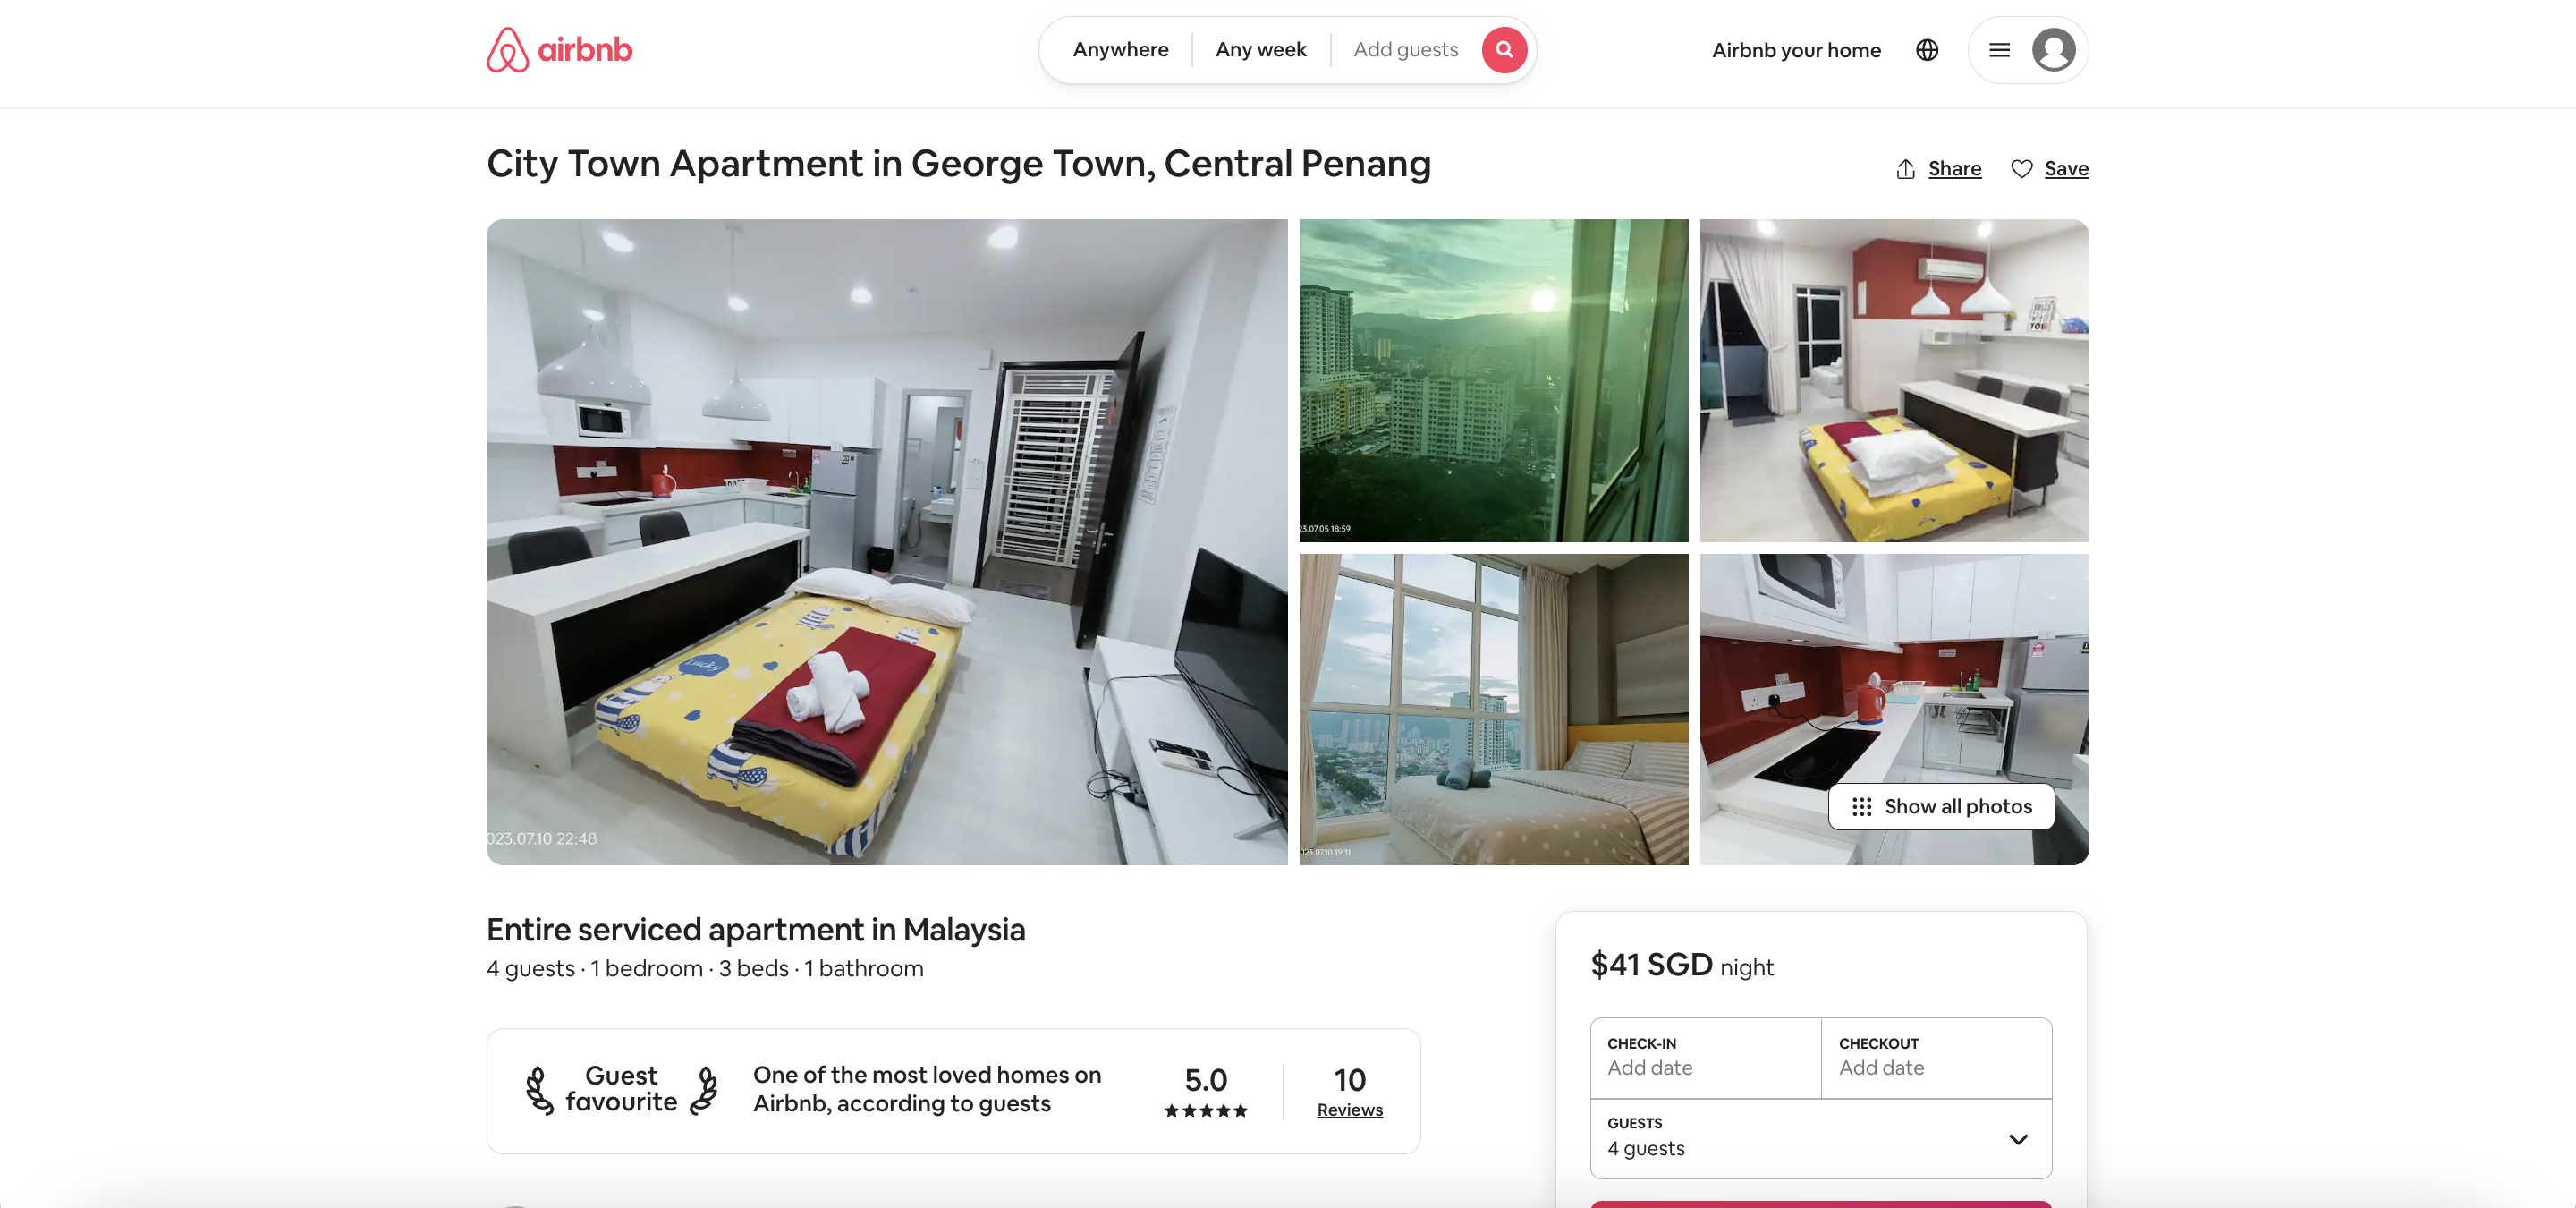 City Town Apartment in George Town, Central Penang